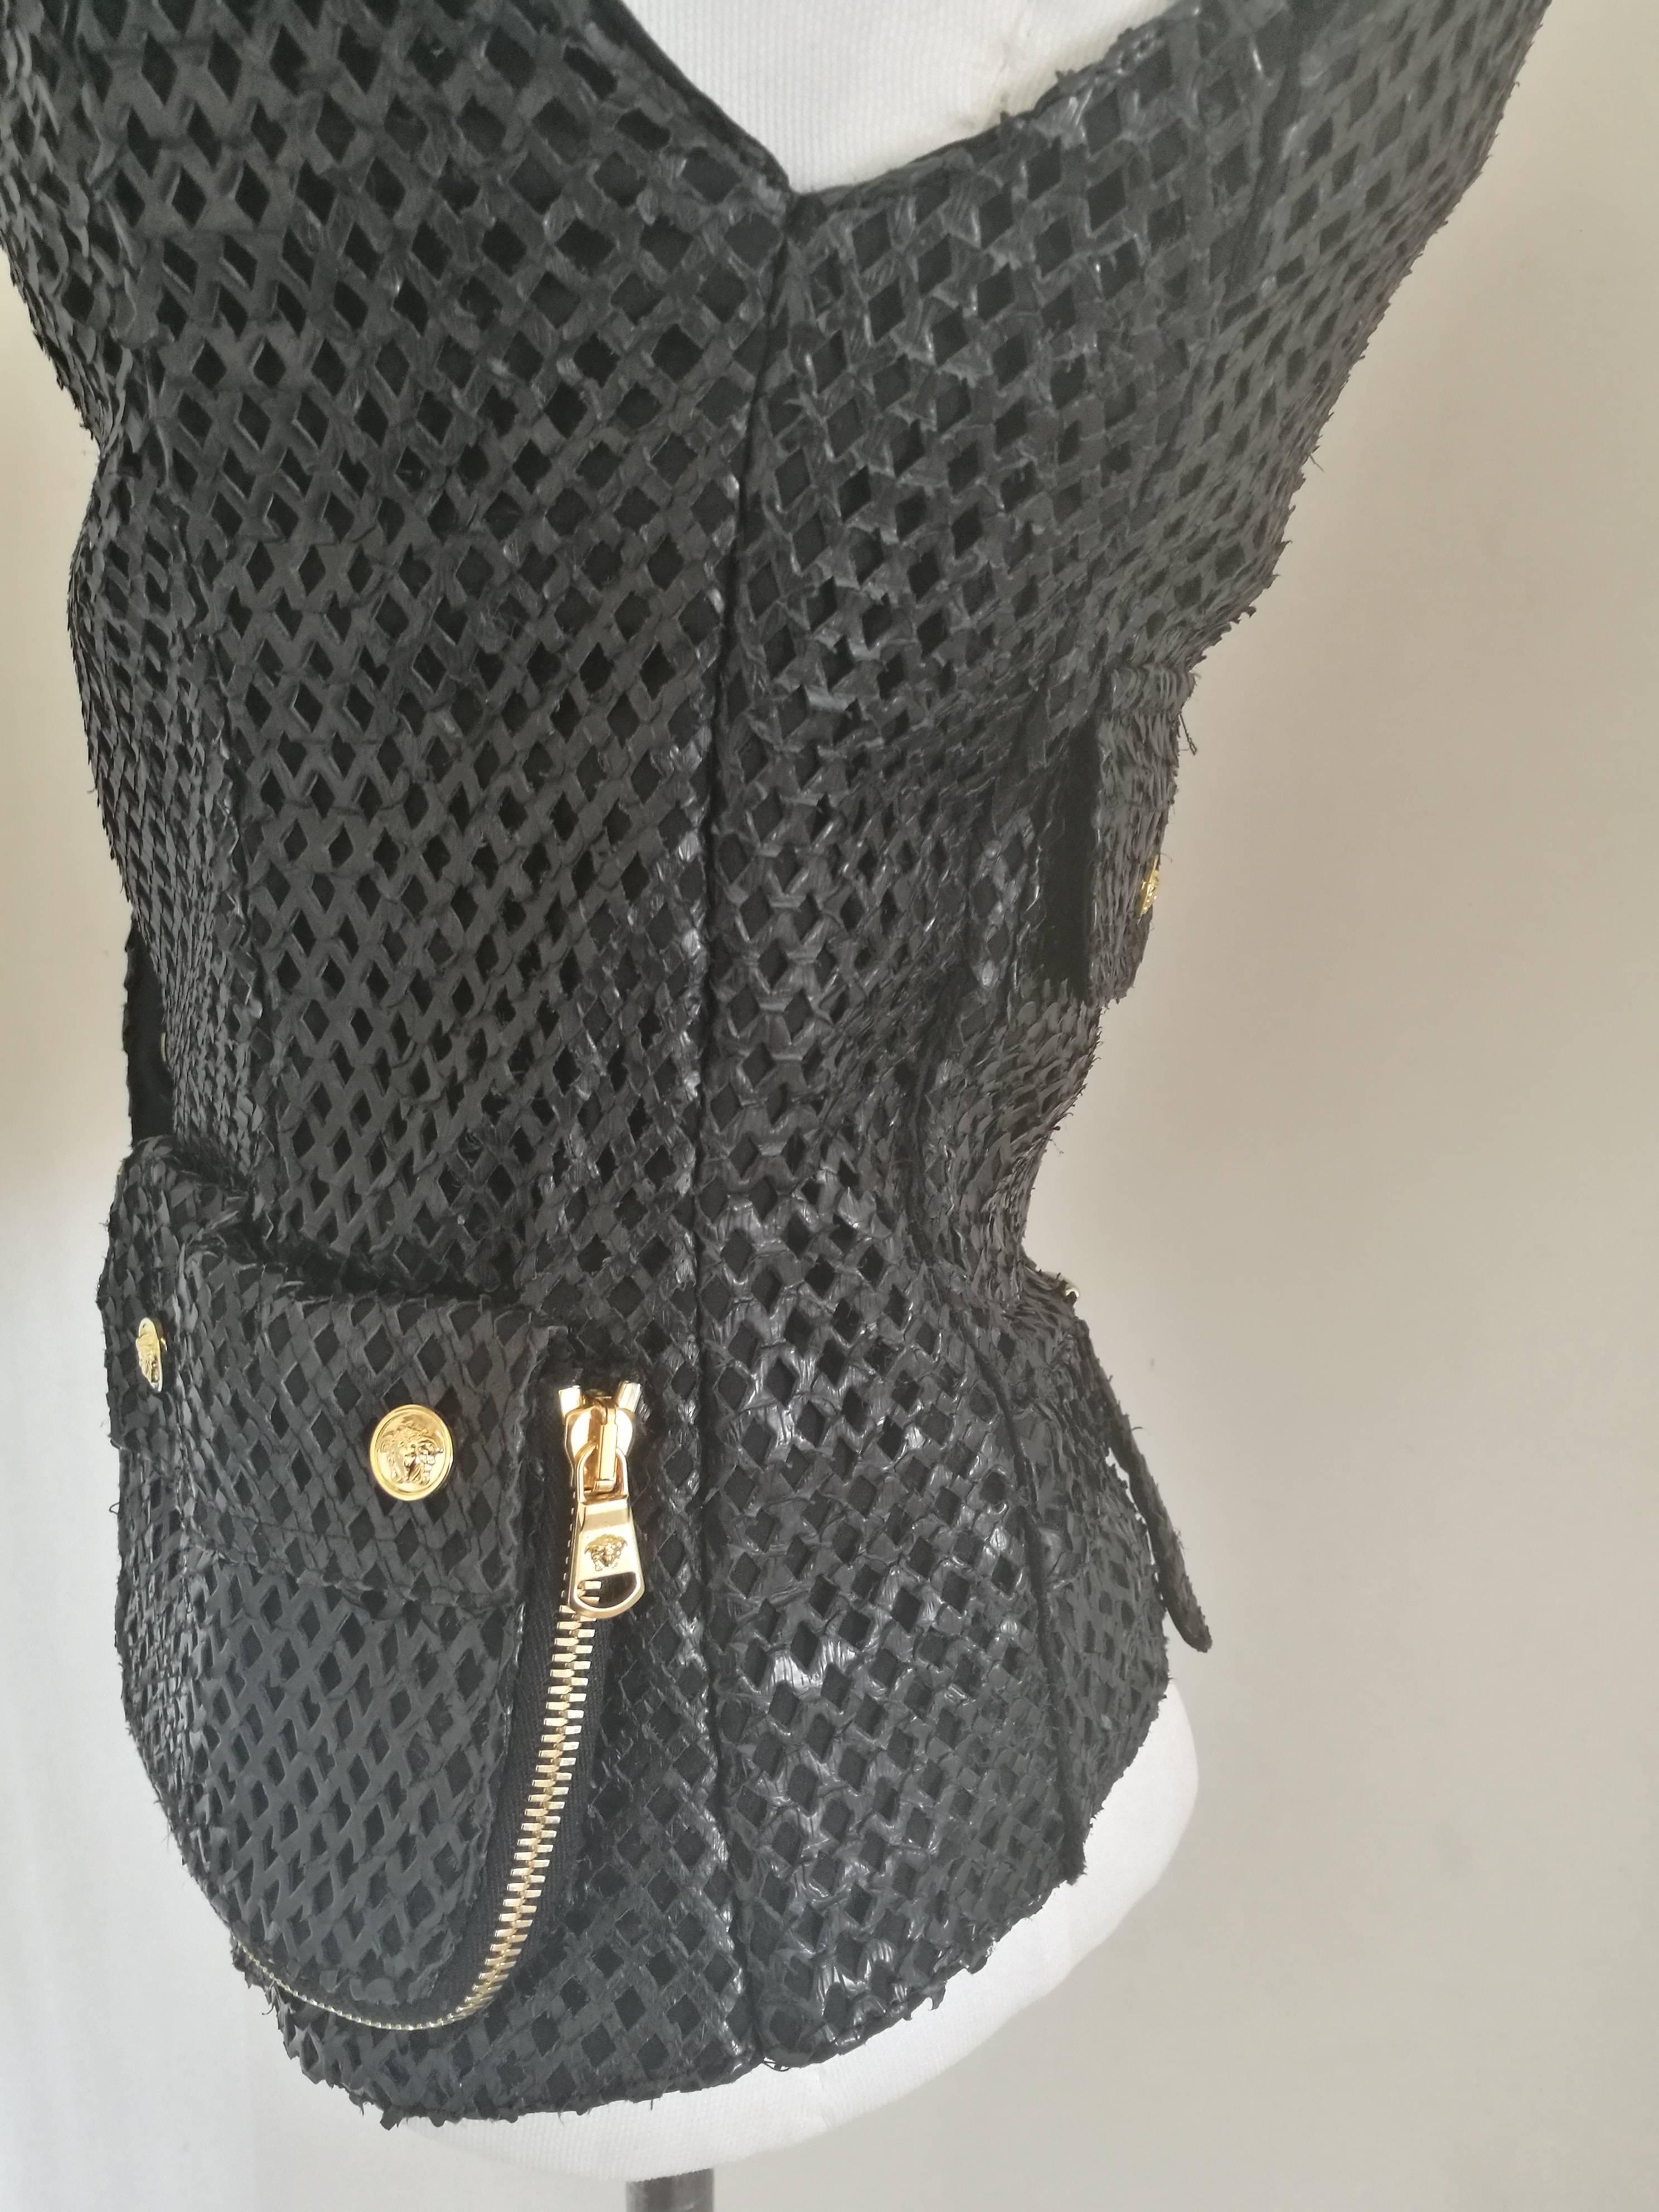 Women's Versace Black Perforated Leather Gilet